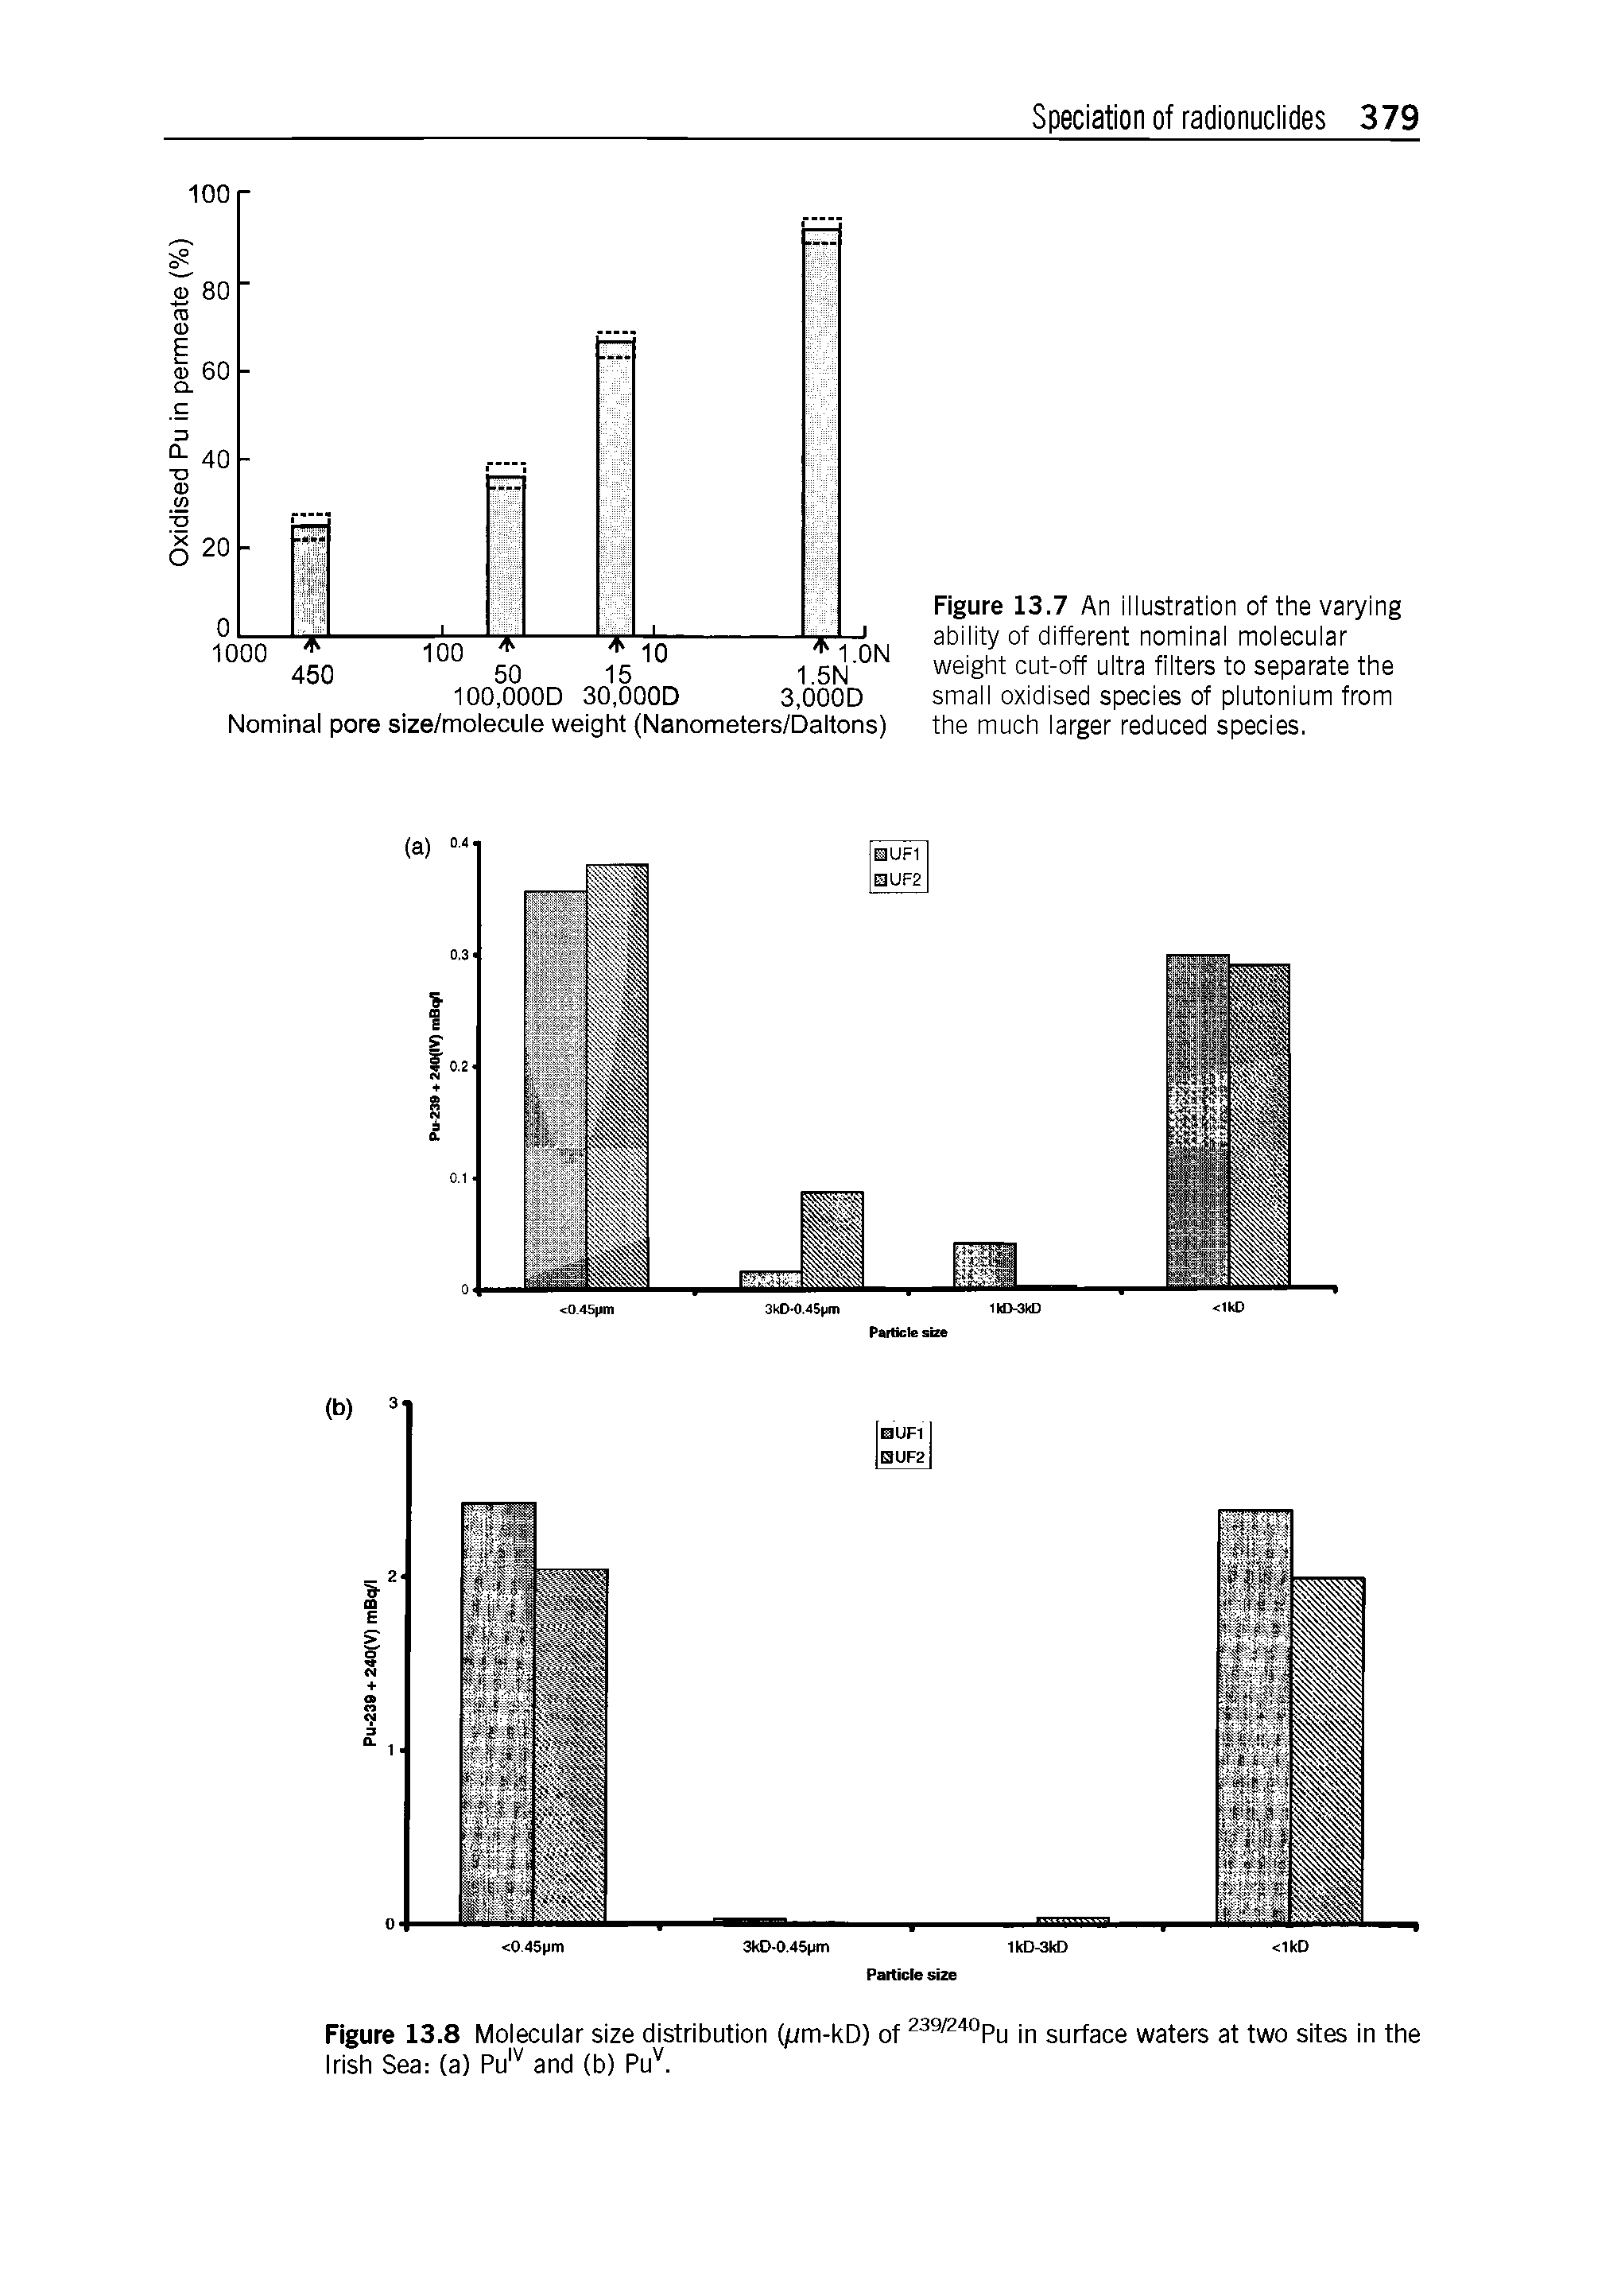 Figure 13.7 An illustration of the varying ability of different nominal molecular weight cut-off ultra filters to separate the small oxidised species of plutonium from the much larger reduced species.